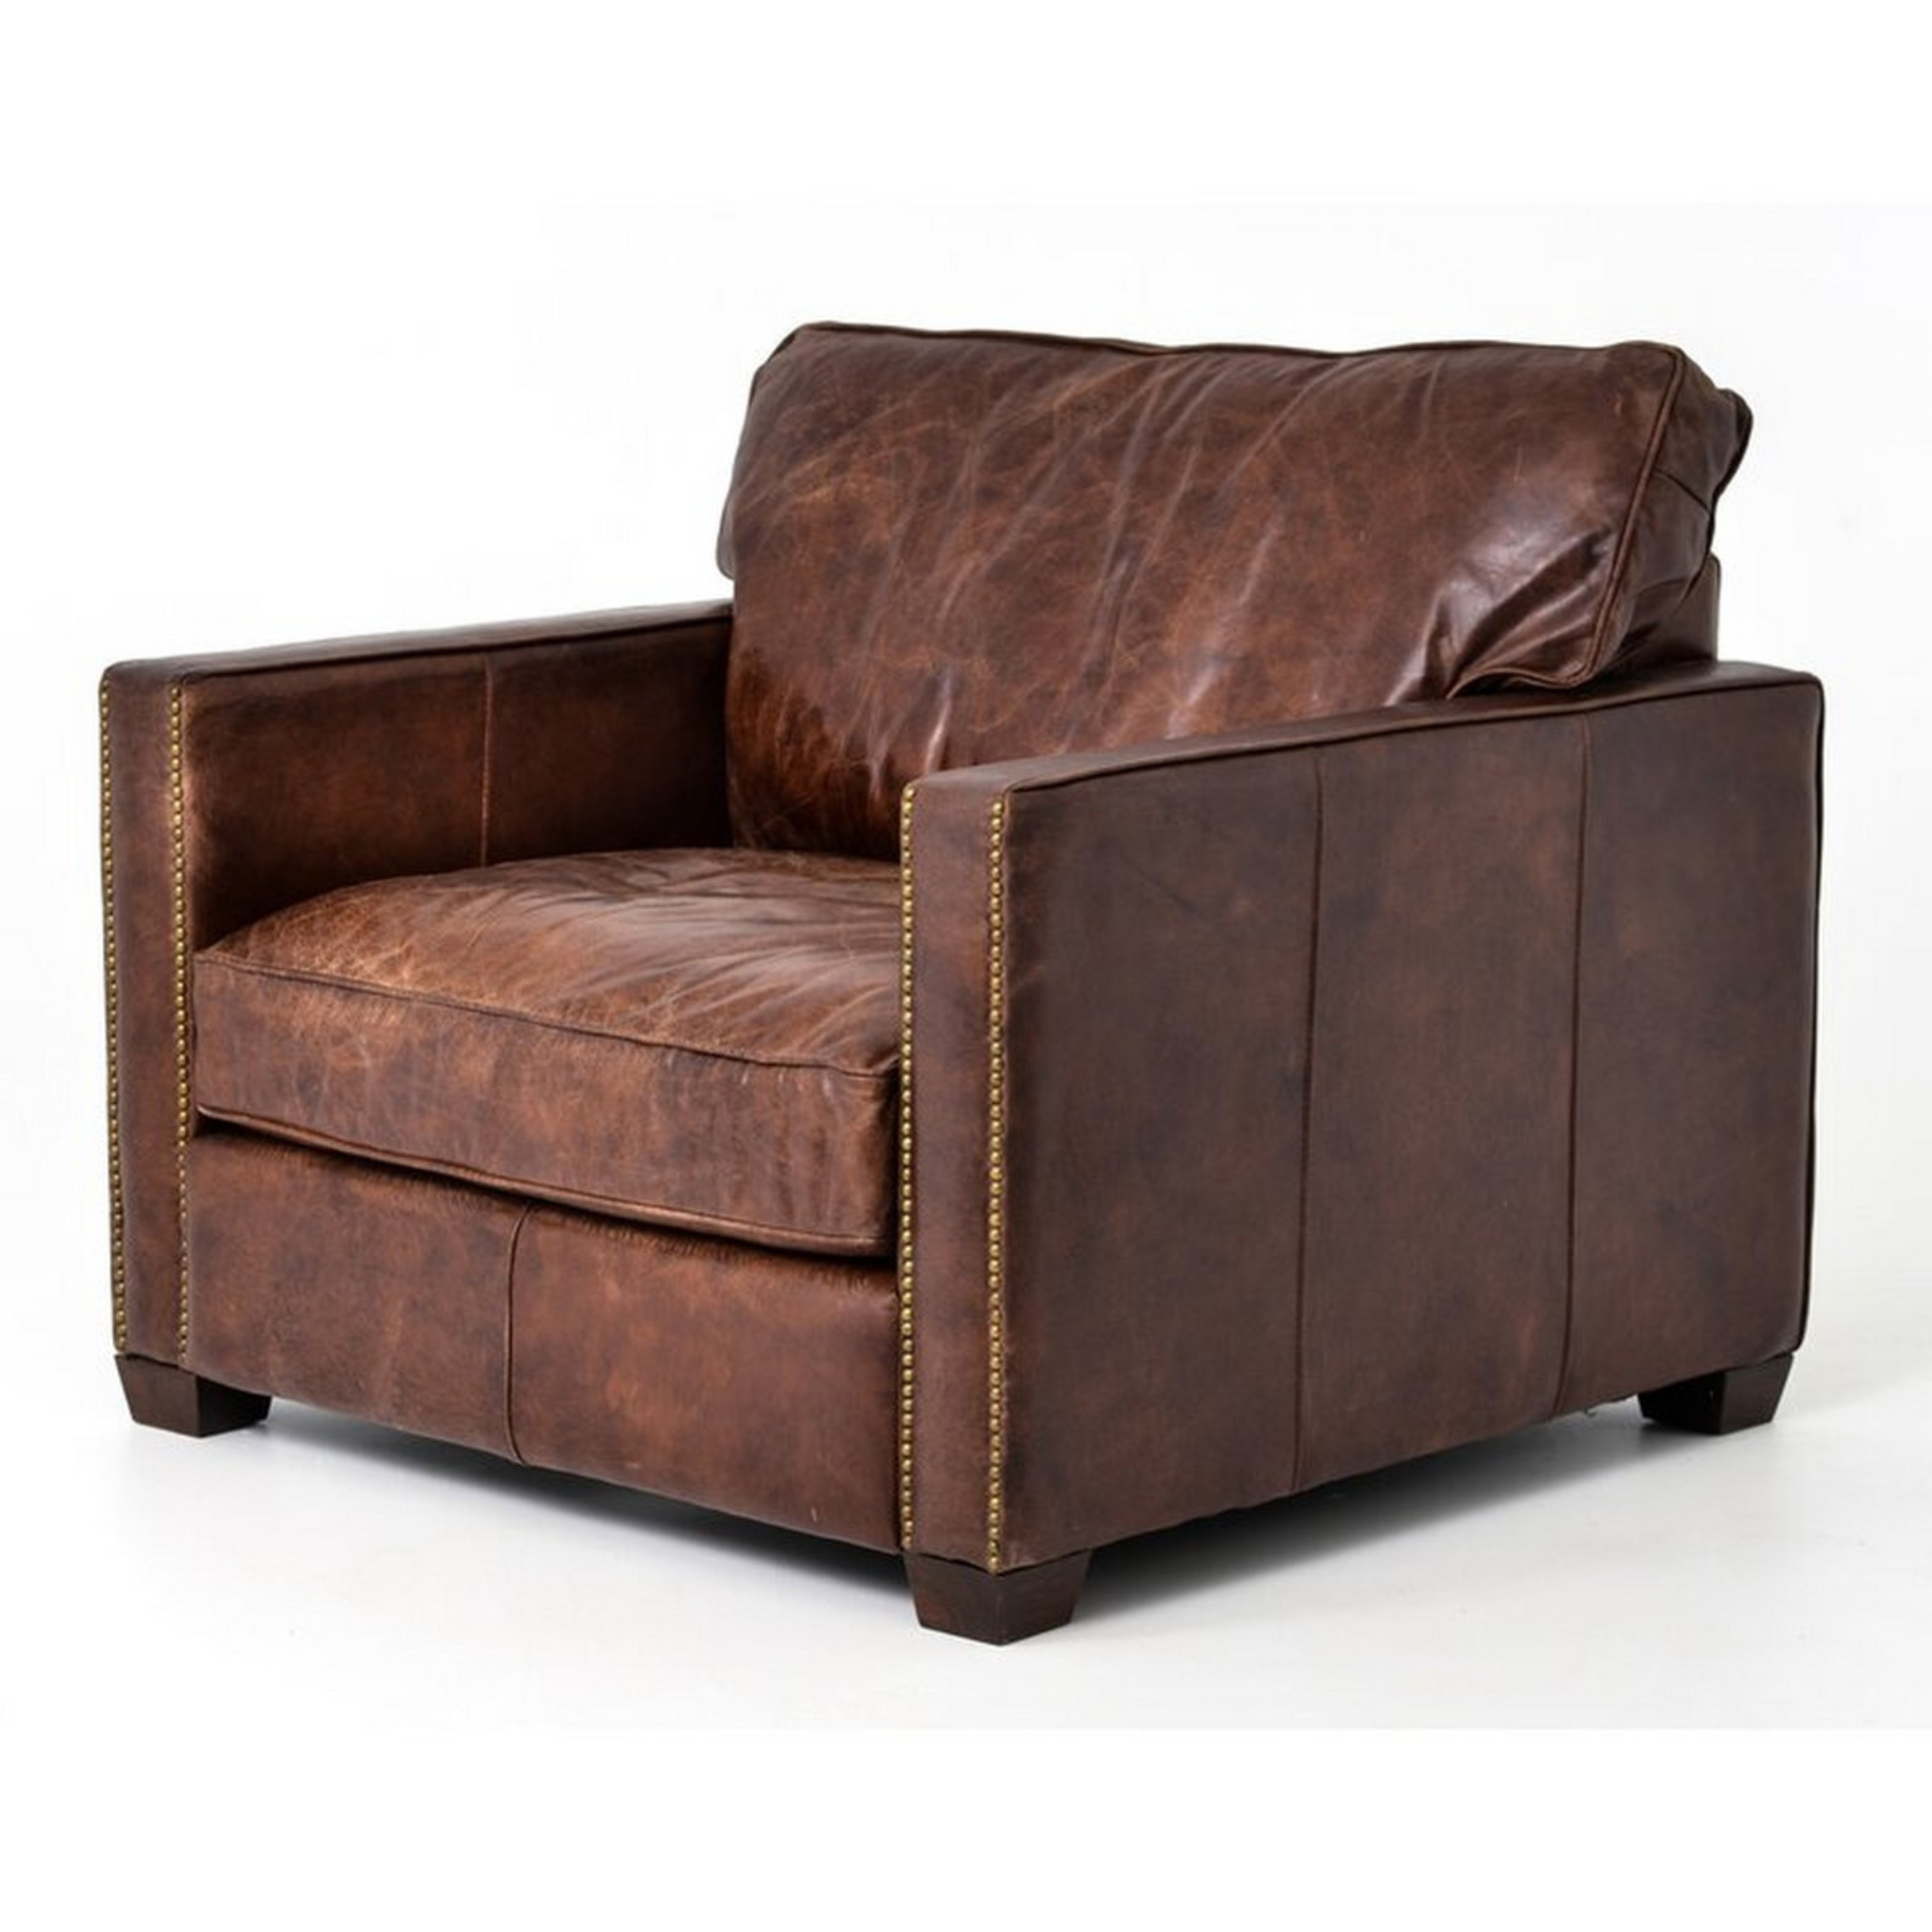 MADISON VINTAGE CIGAR FULL LEATHER CHAIR